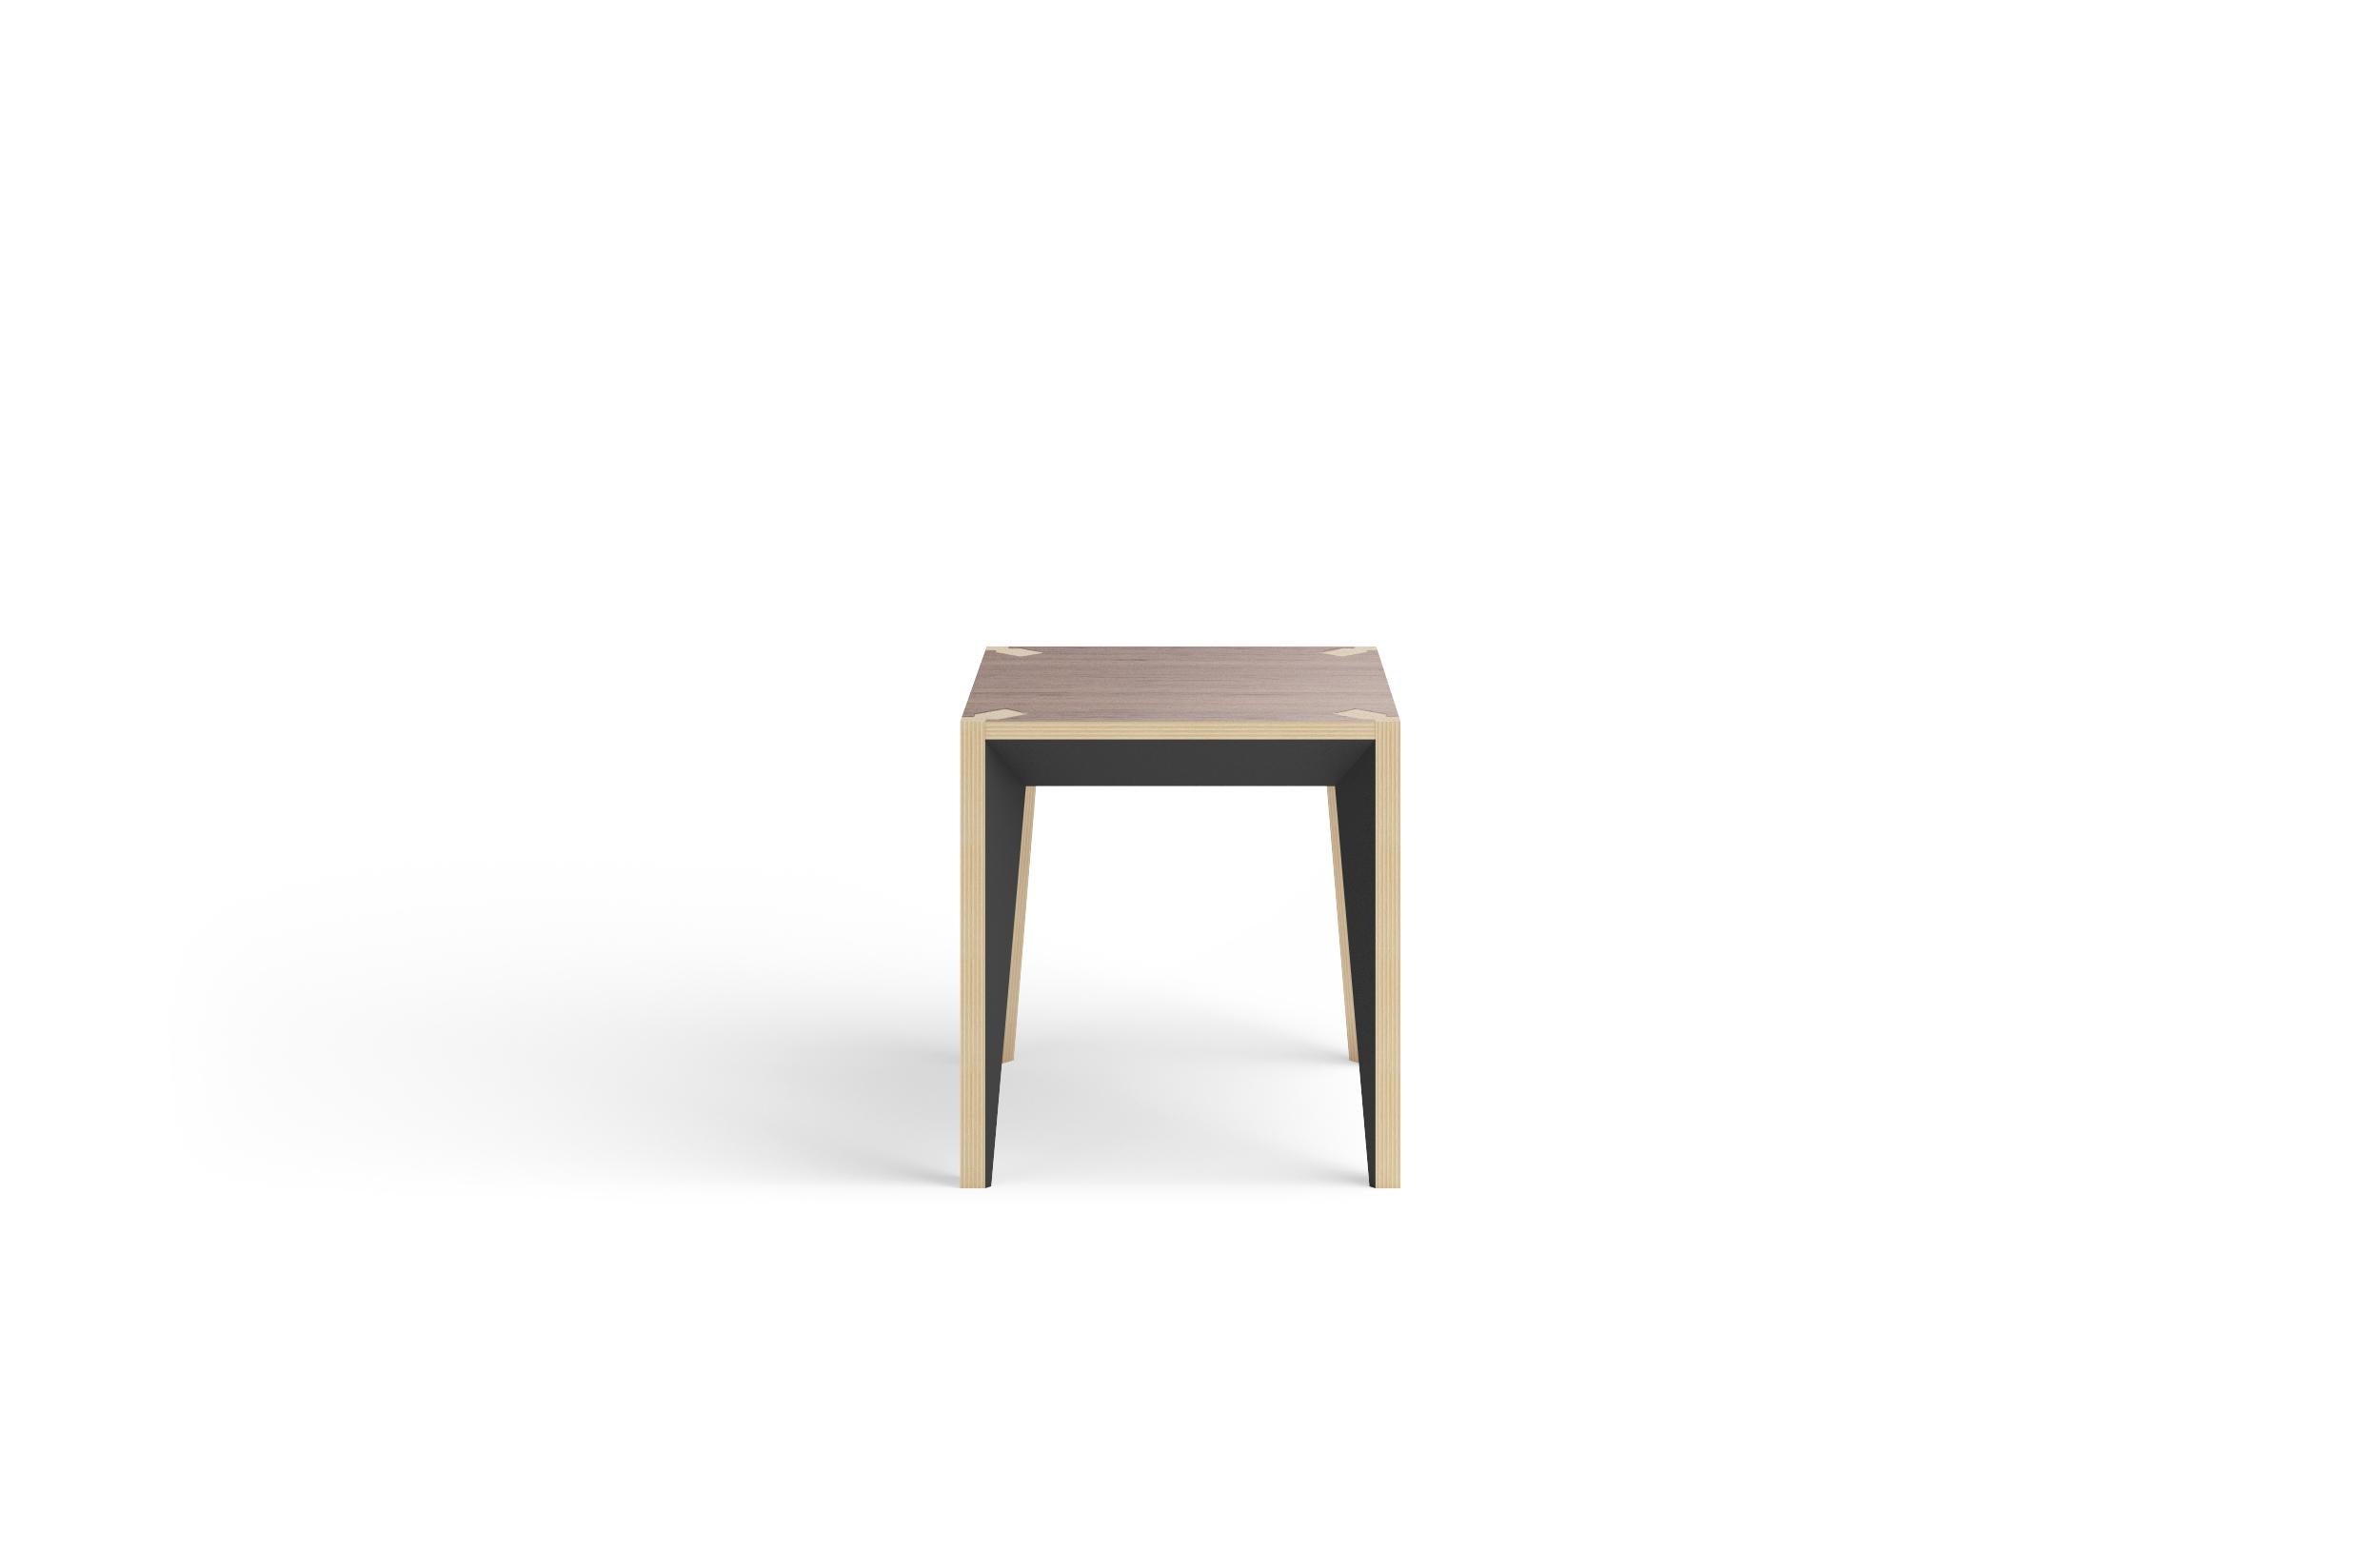 Part of the MiMi Series, this Minimalist, versatile side table or stool accents the home and office. Clean, faceted geometry and painted surfaces add depth and sophistication, while the walnut veneer top accommodates your preference for display or